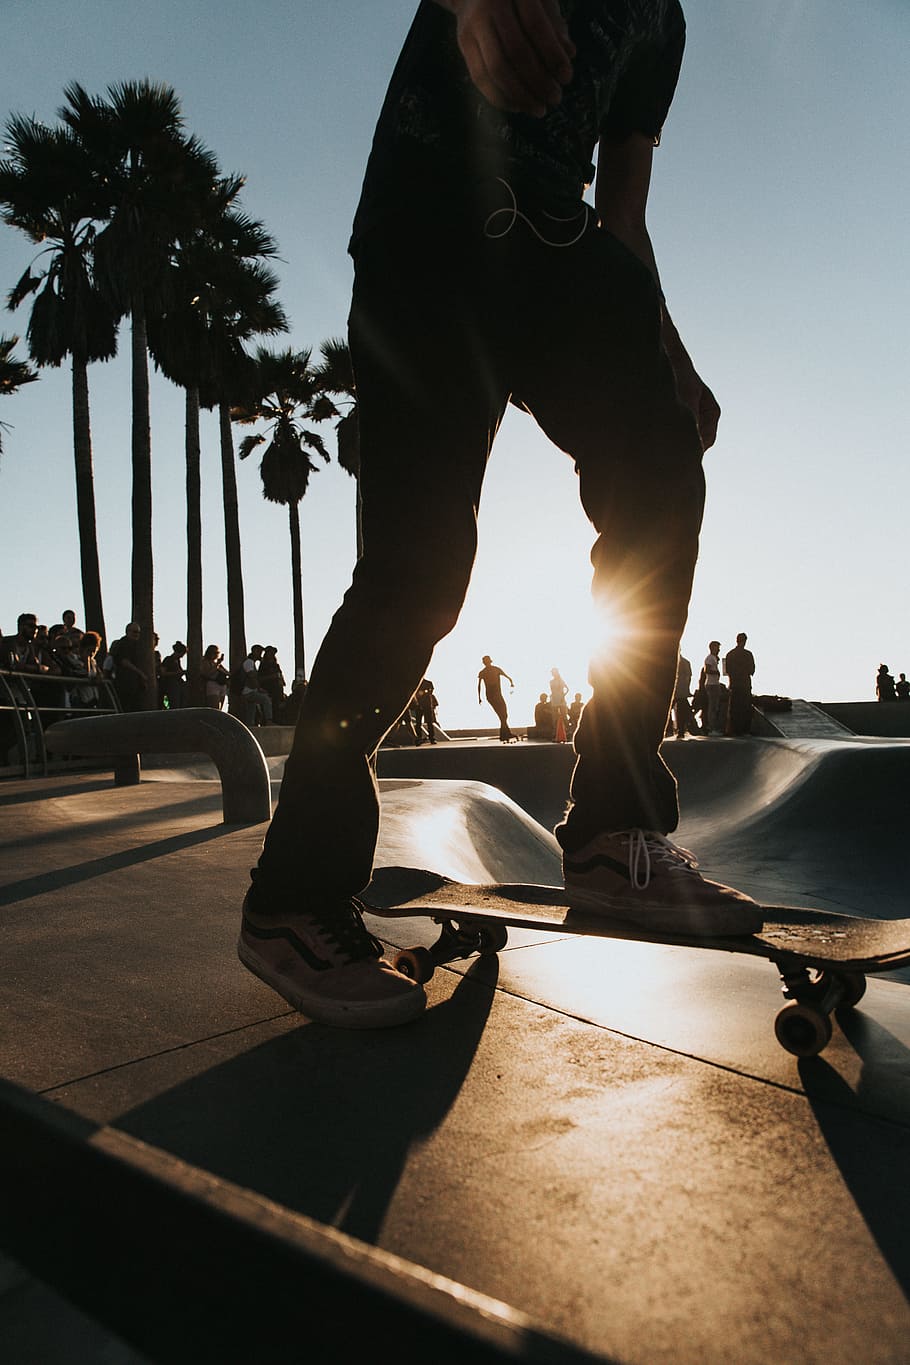 HD wallpaper person playing skateboard skating skateboarding skate park   Skateboard Skateboard park Silhouette photos